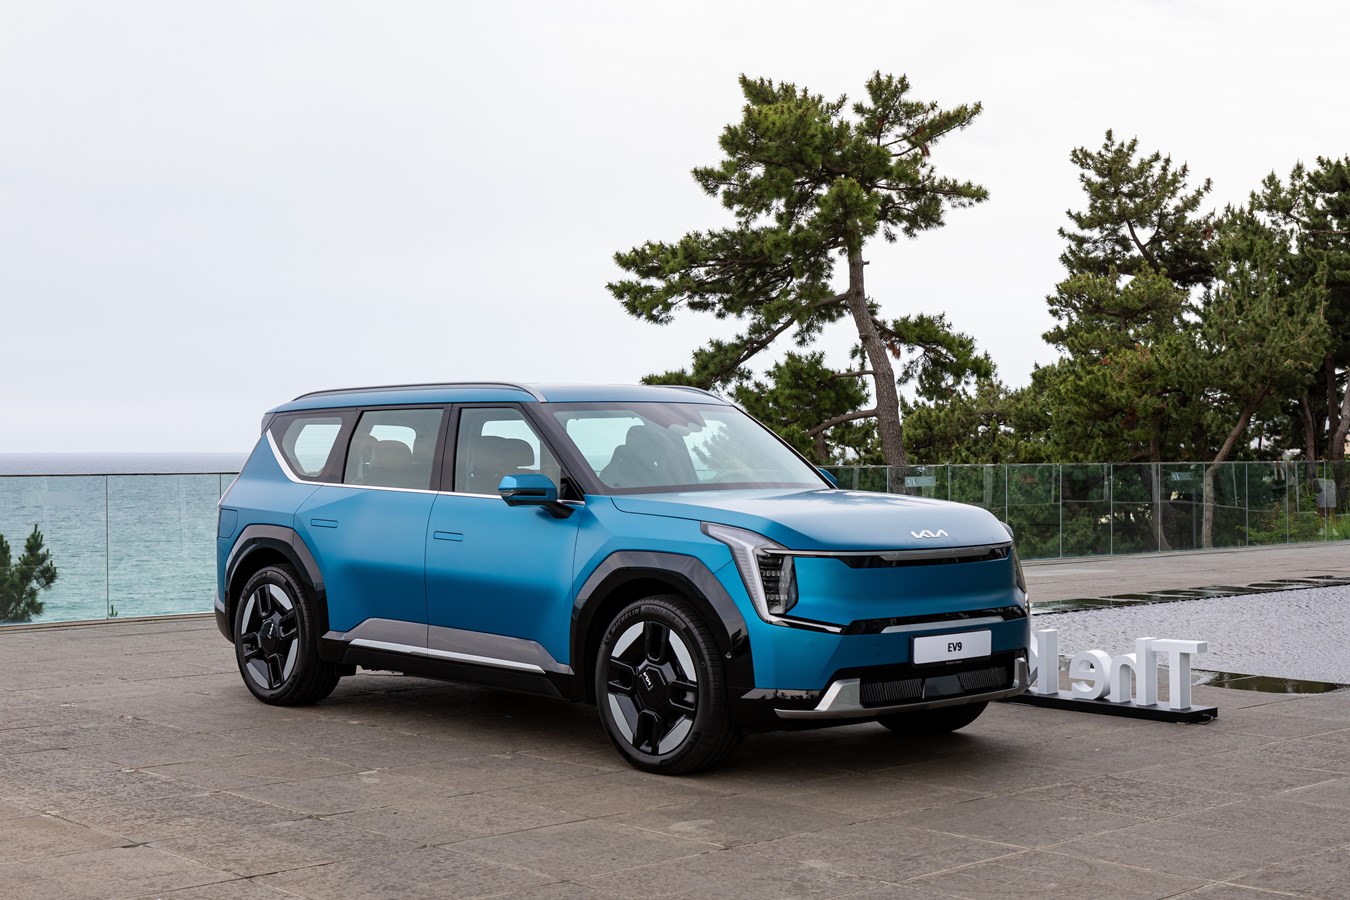 Kia's EV9 electric SUV brings space comfort and adventure to every journey